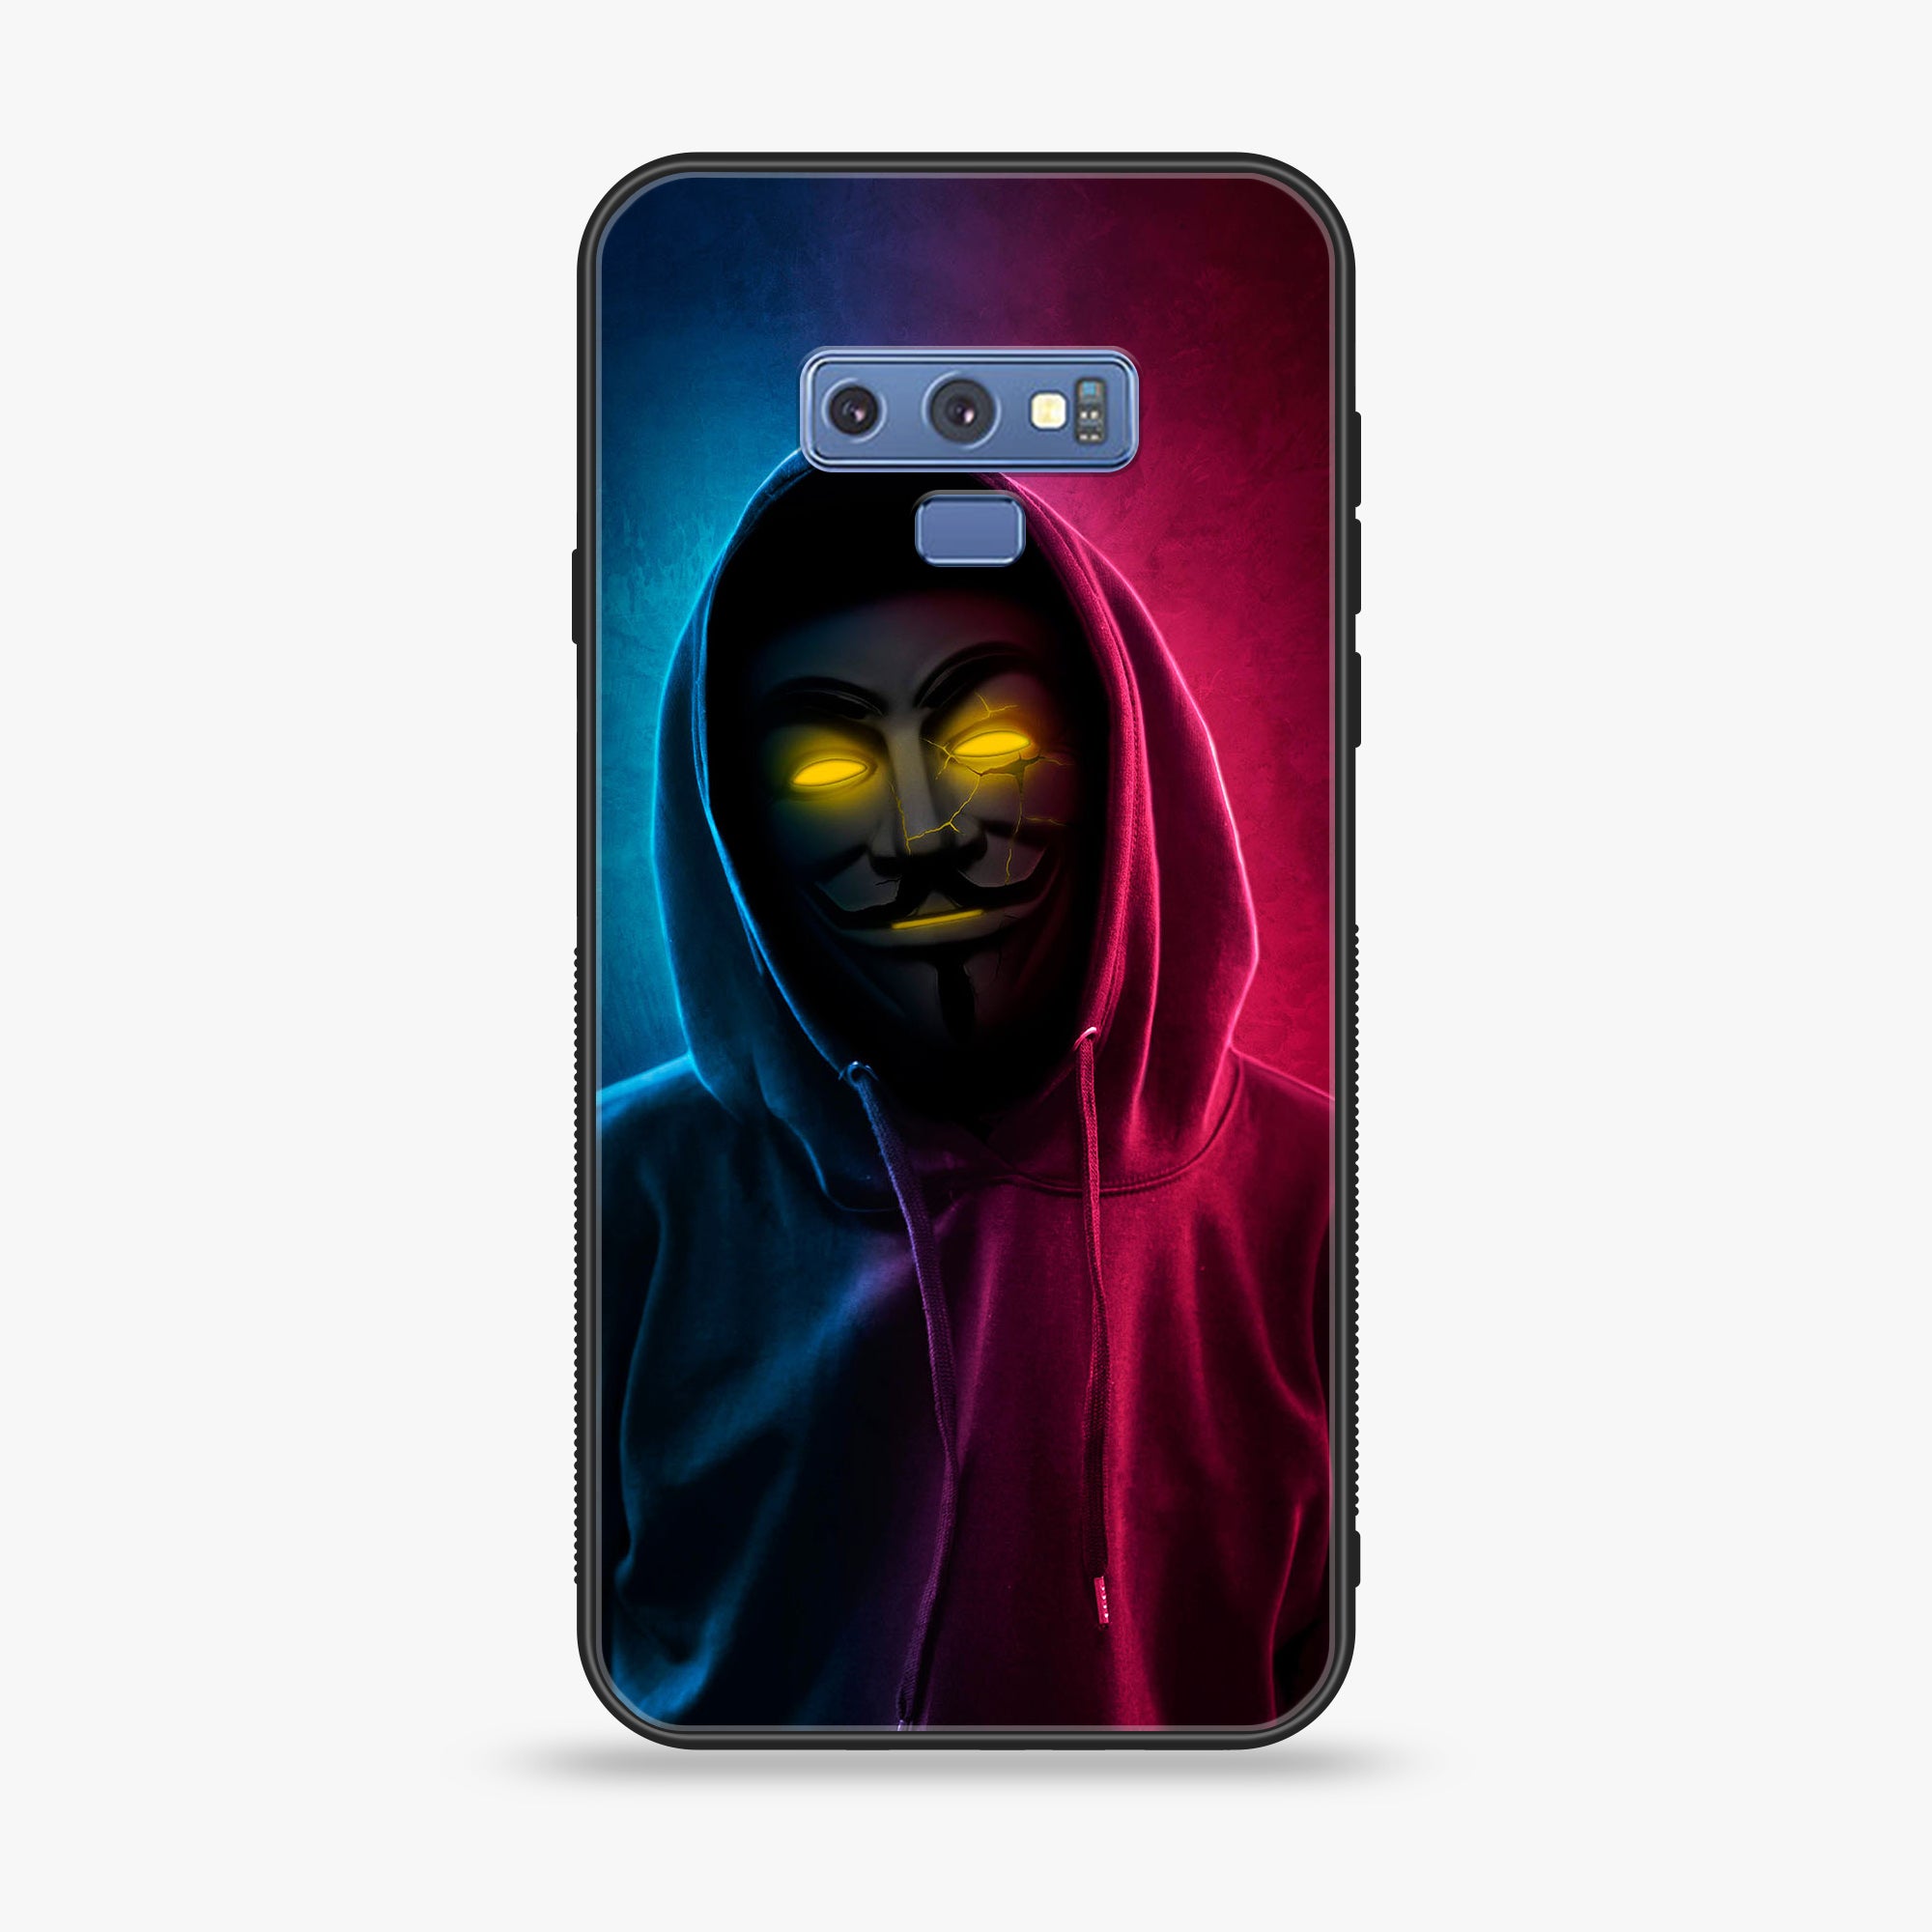 Samsung Galaxy Note 9 - Anonymous 2.0 - Premium Printed Glass soft Bumper shock Proof Case